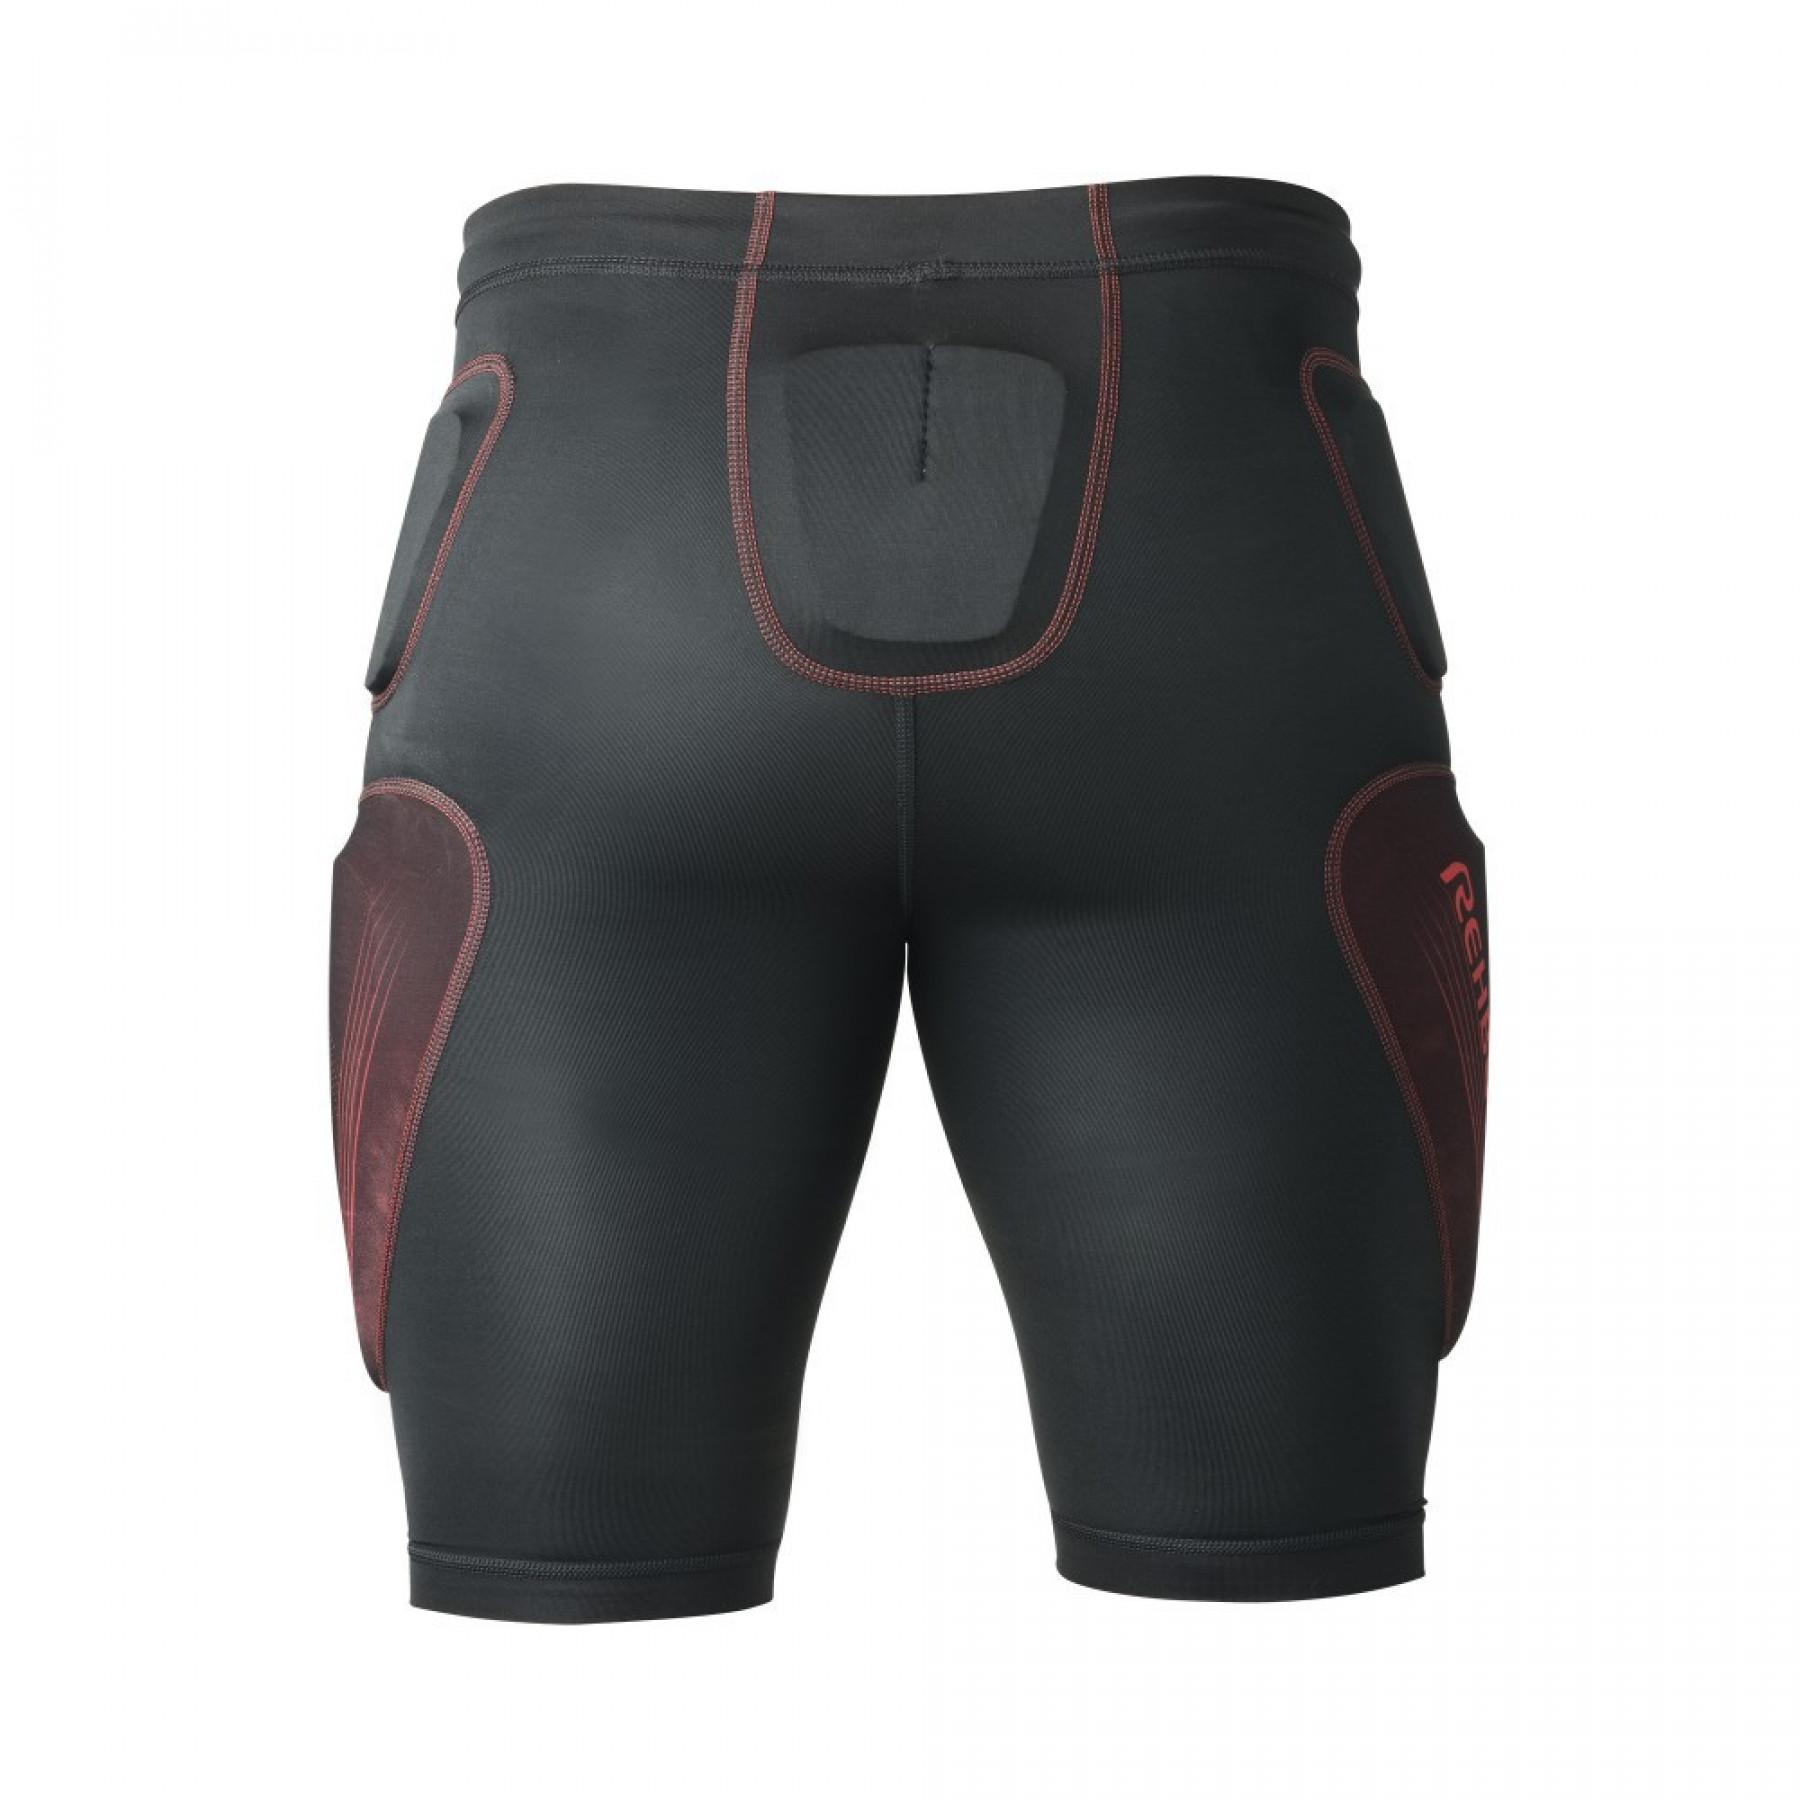 Compression shorts Rehband RX Contact